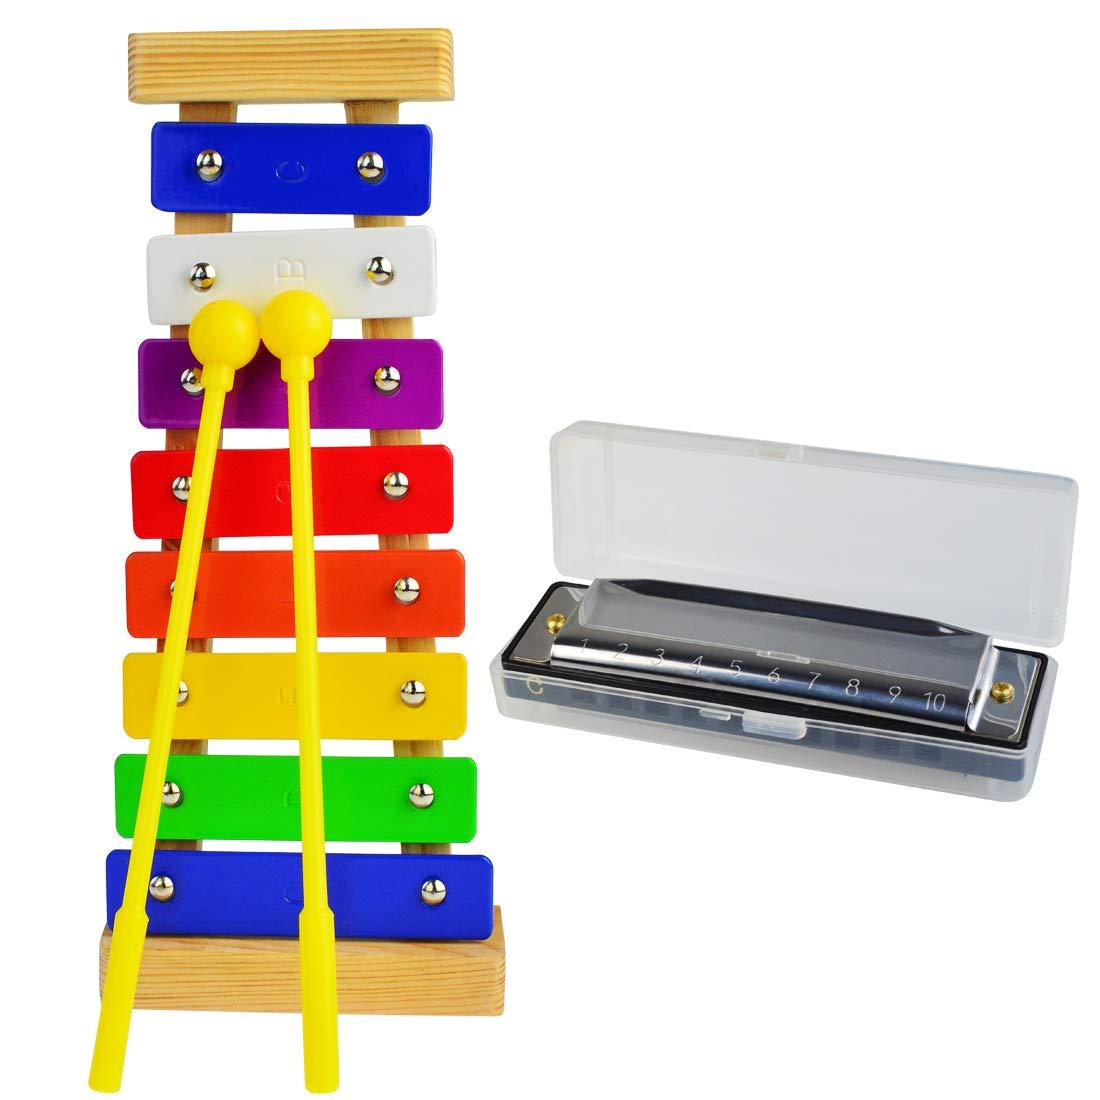 50% discount on Xylophone for Kids, Yolyoo Wooden Musical Toy Musical